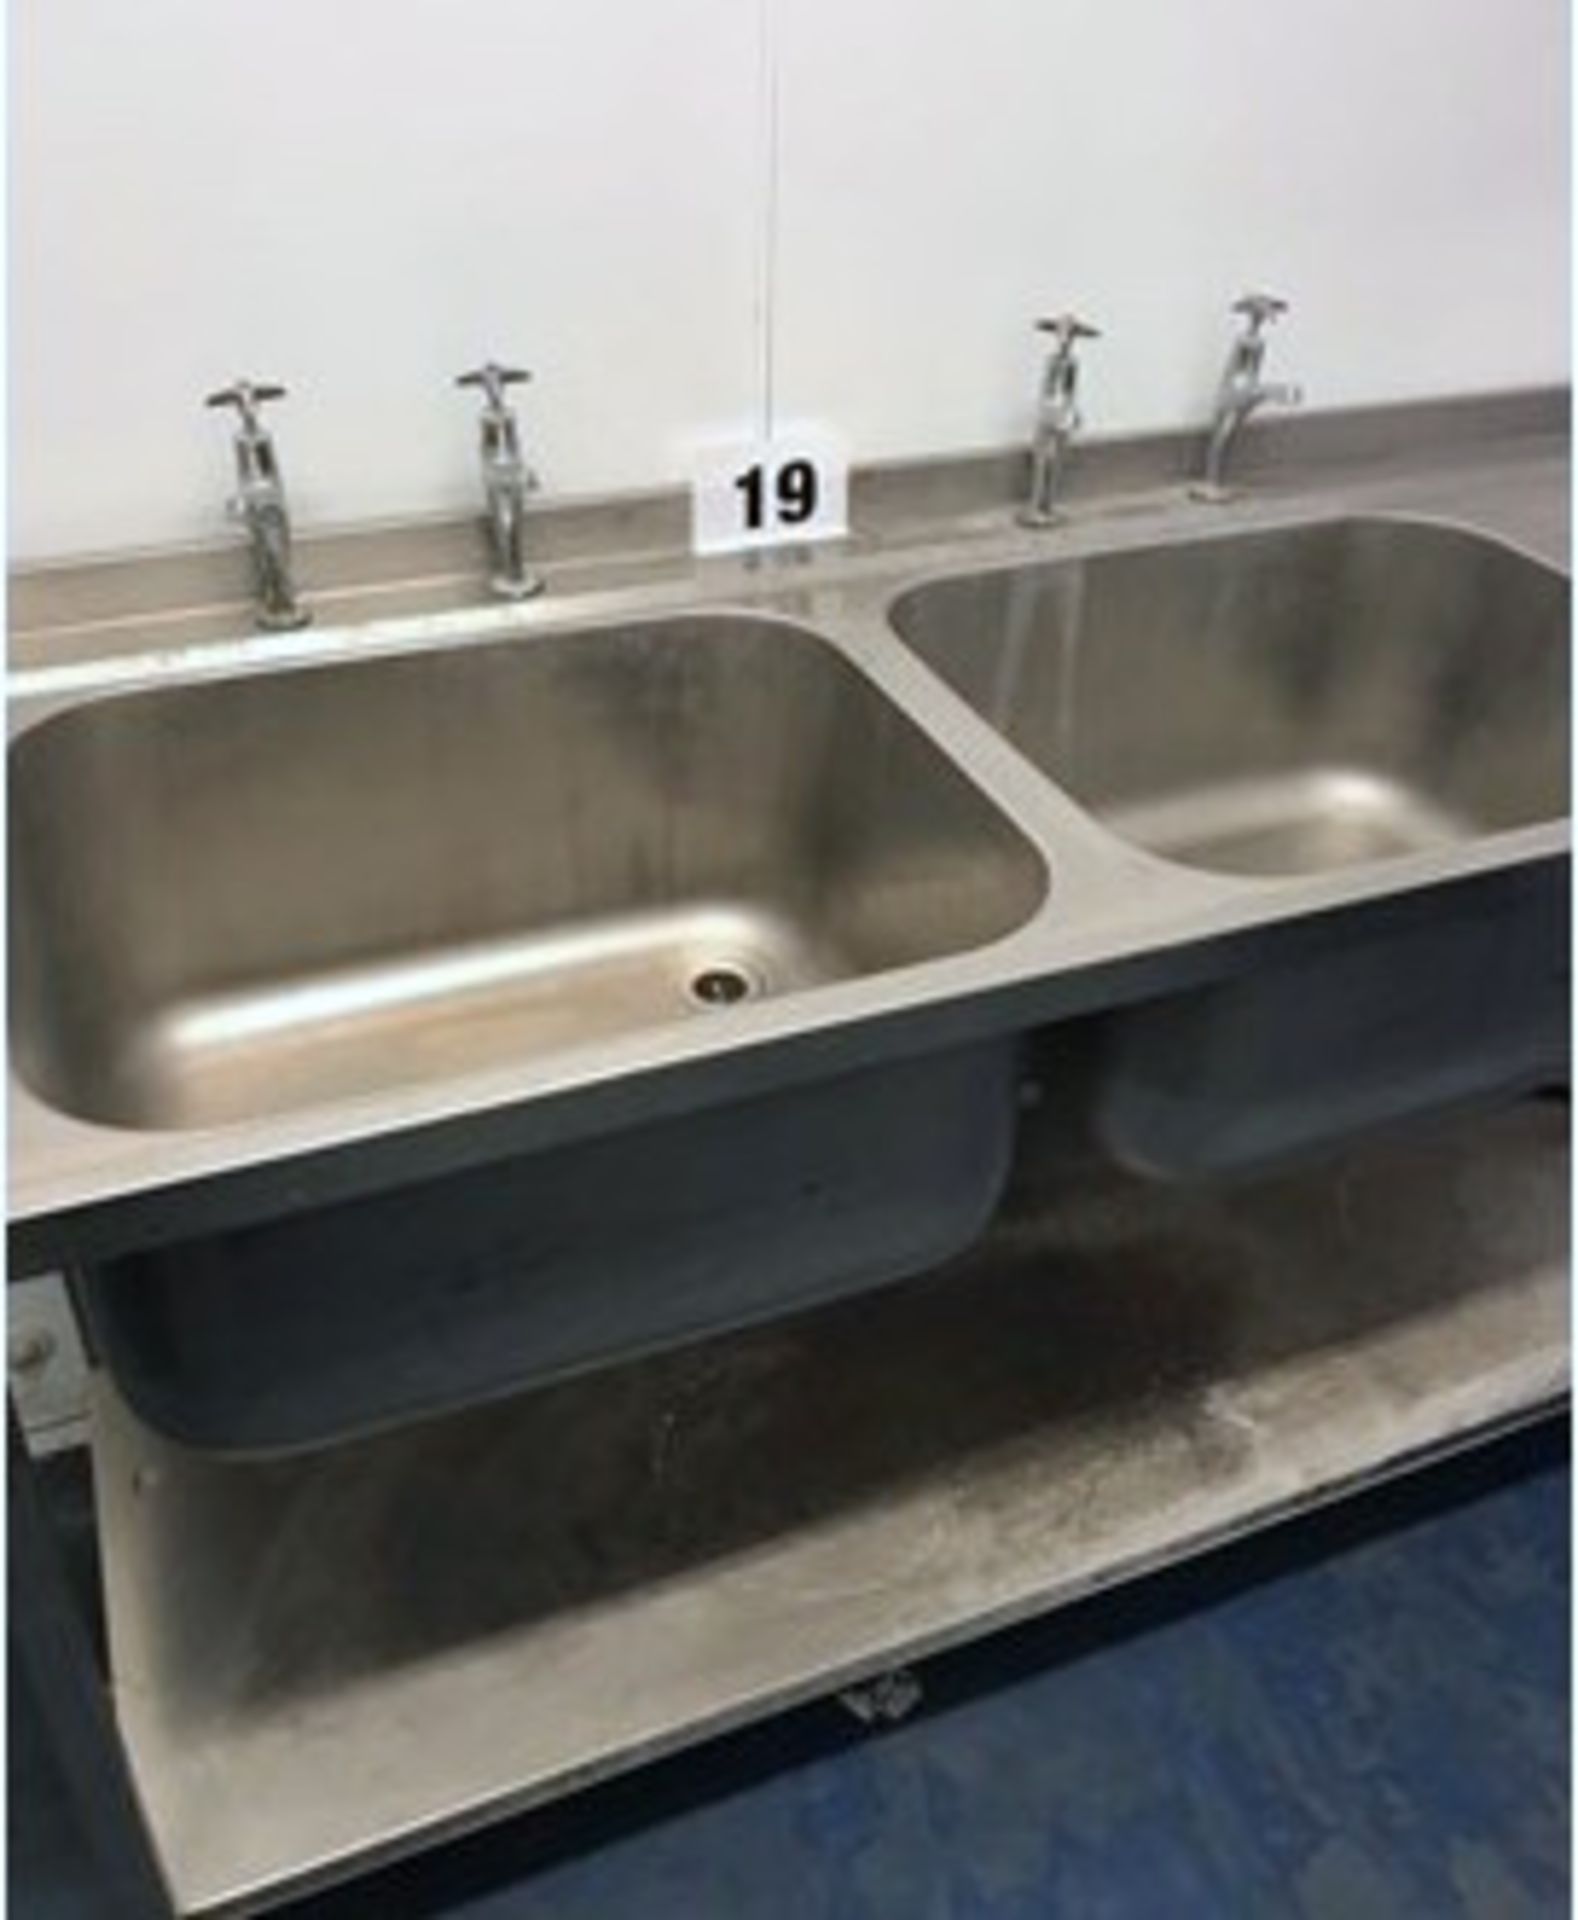 S/S Syspal double sink. Approx. 1800mm long x 865mm high LO £10 - Image 2 of 3